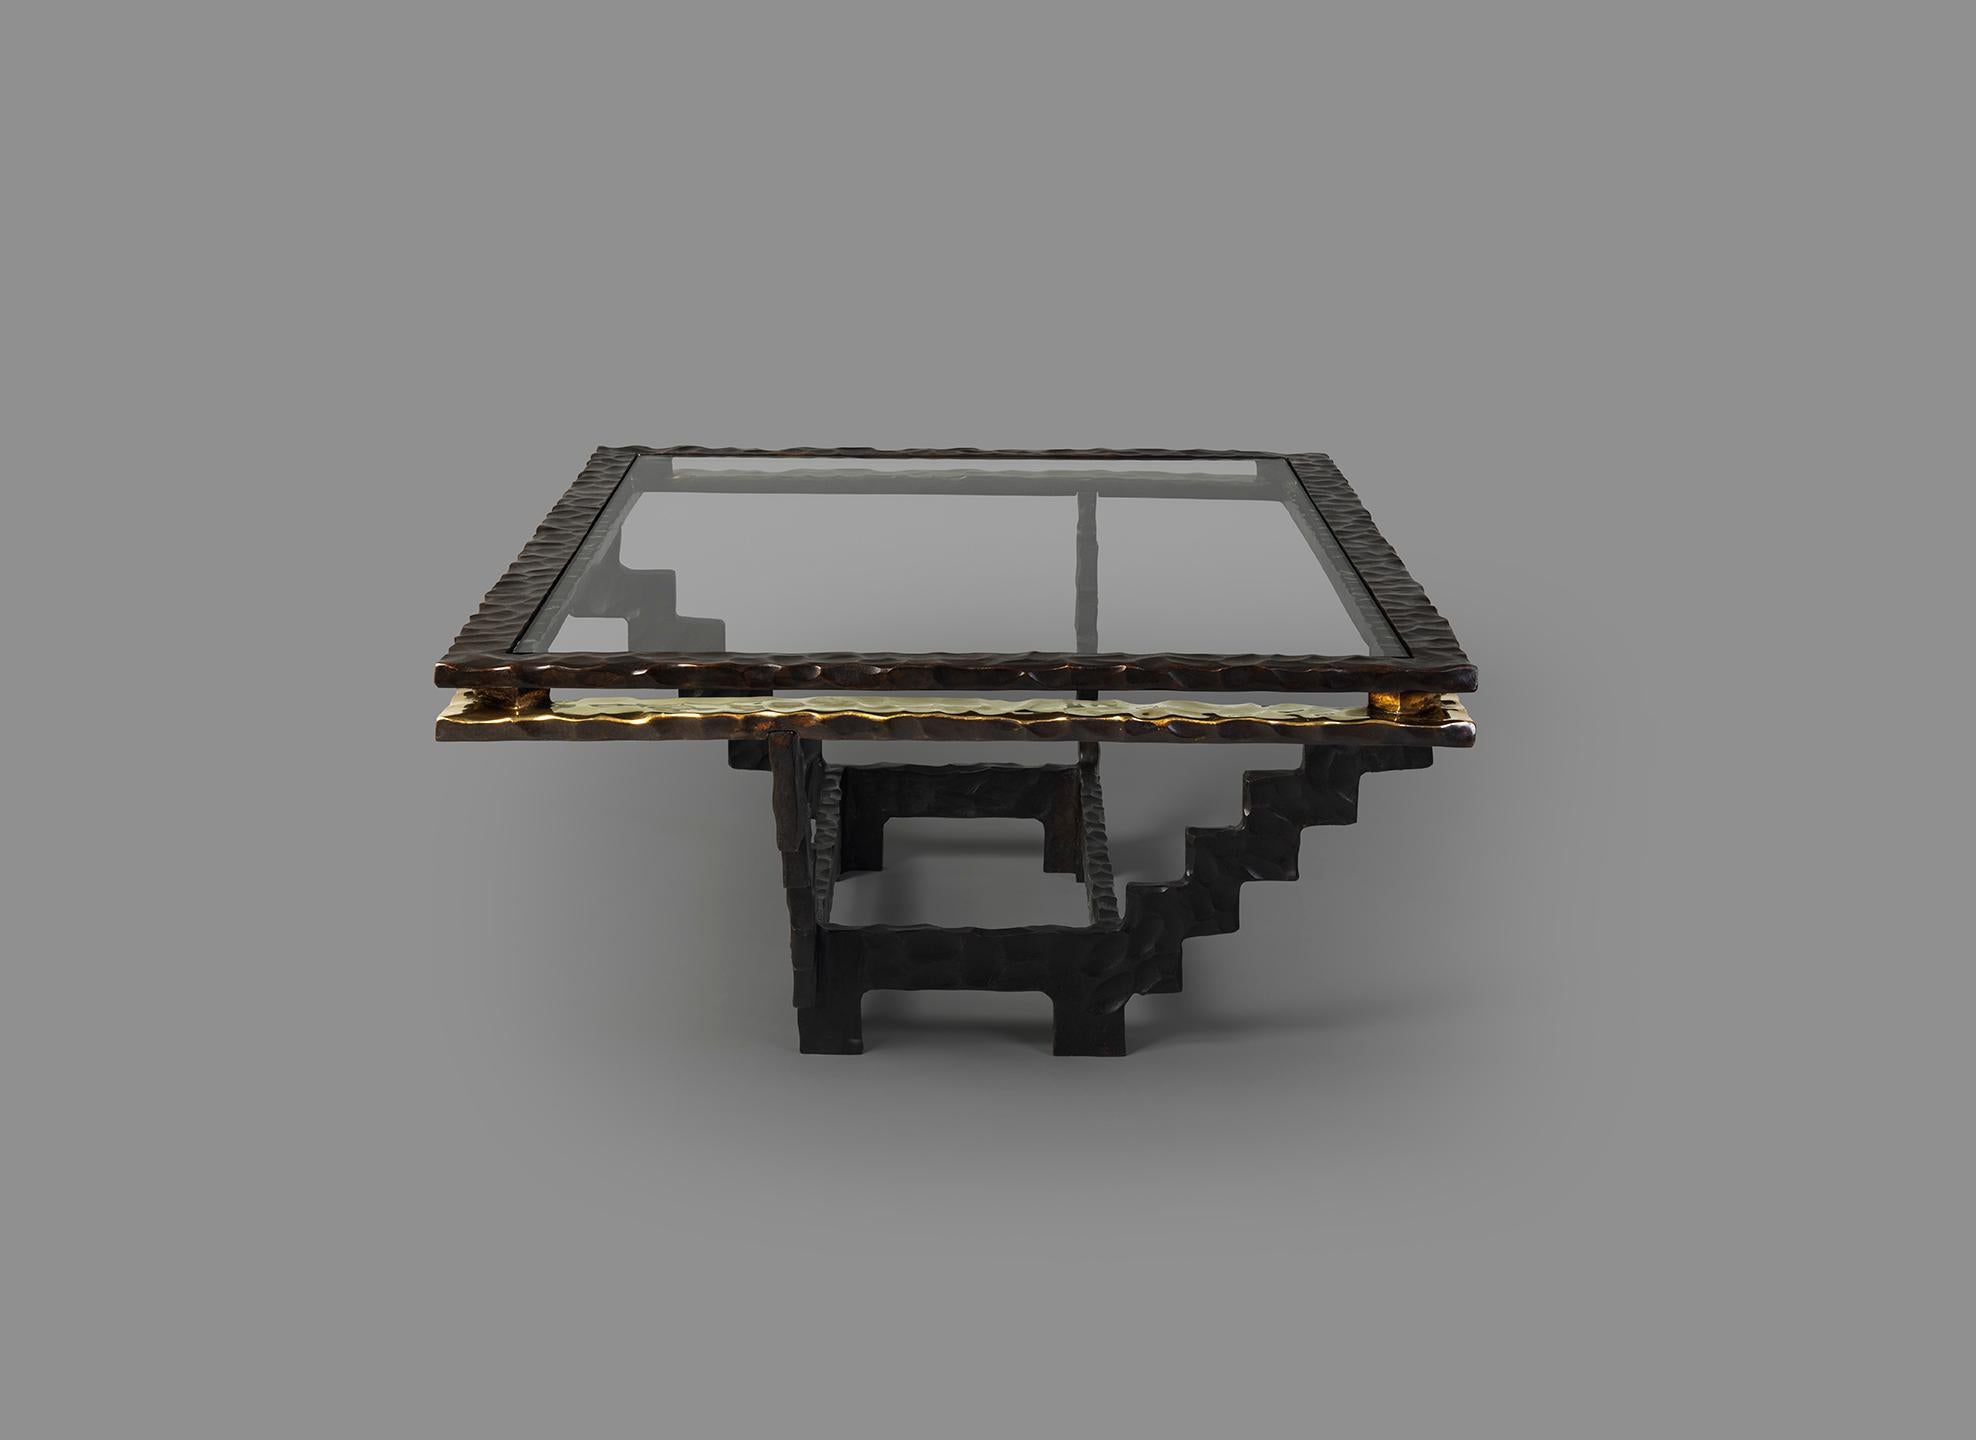 Brutalist Eaglador - Ziggurat Coffee Table Cast in Bronze with Patinated Finish For Sale